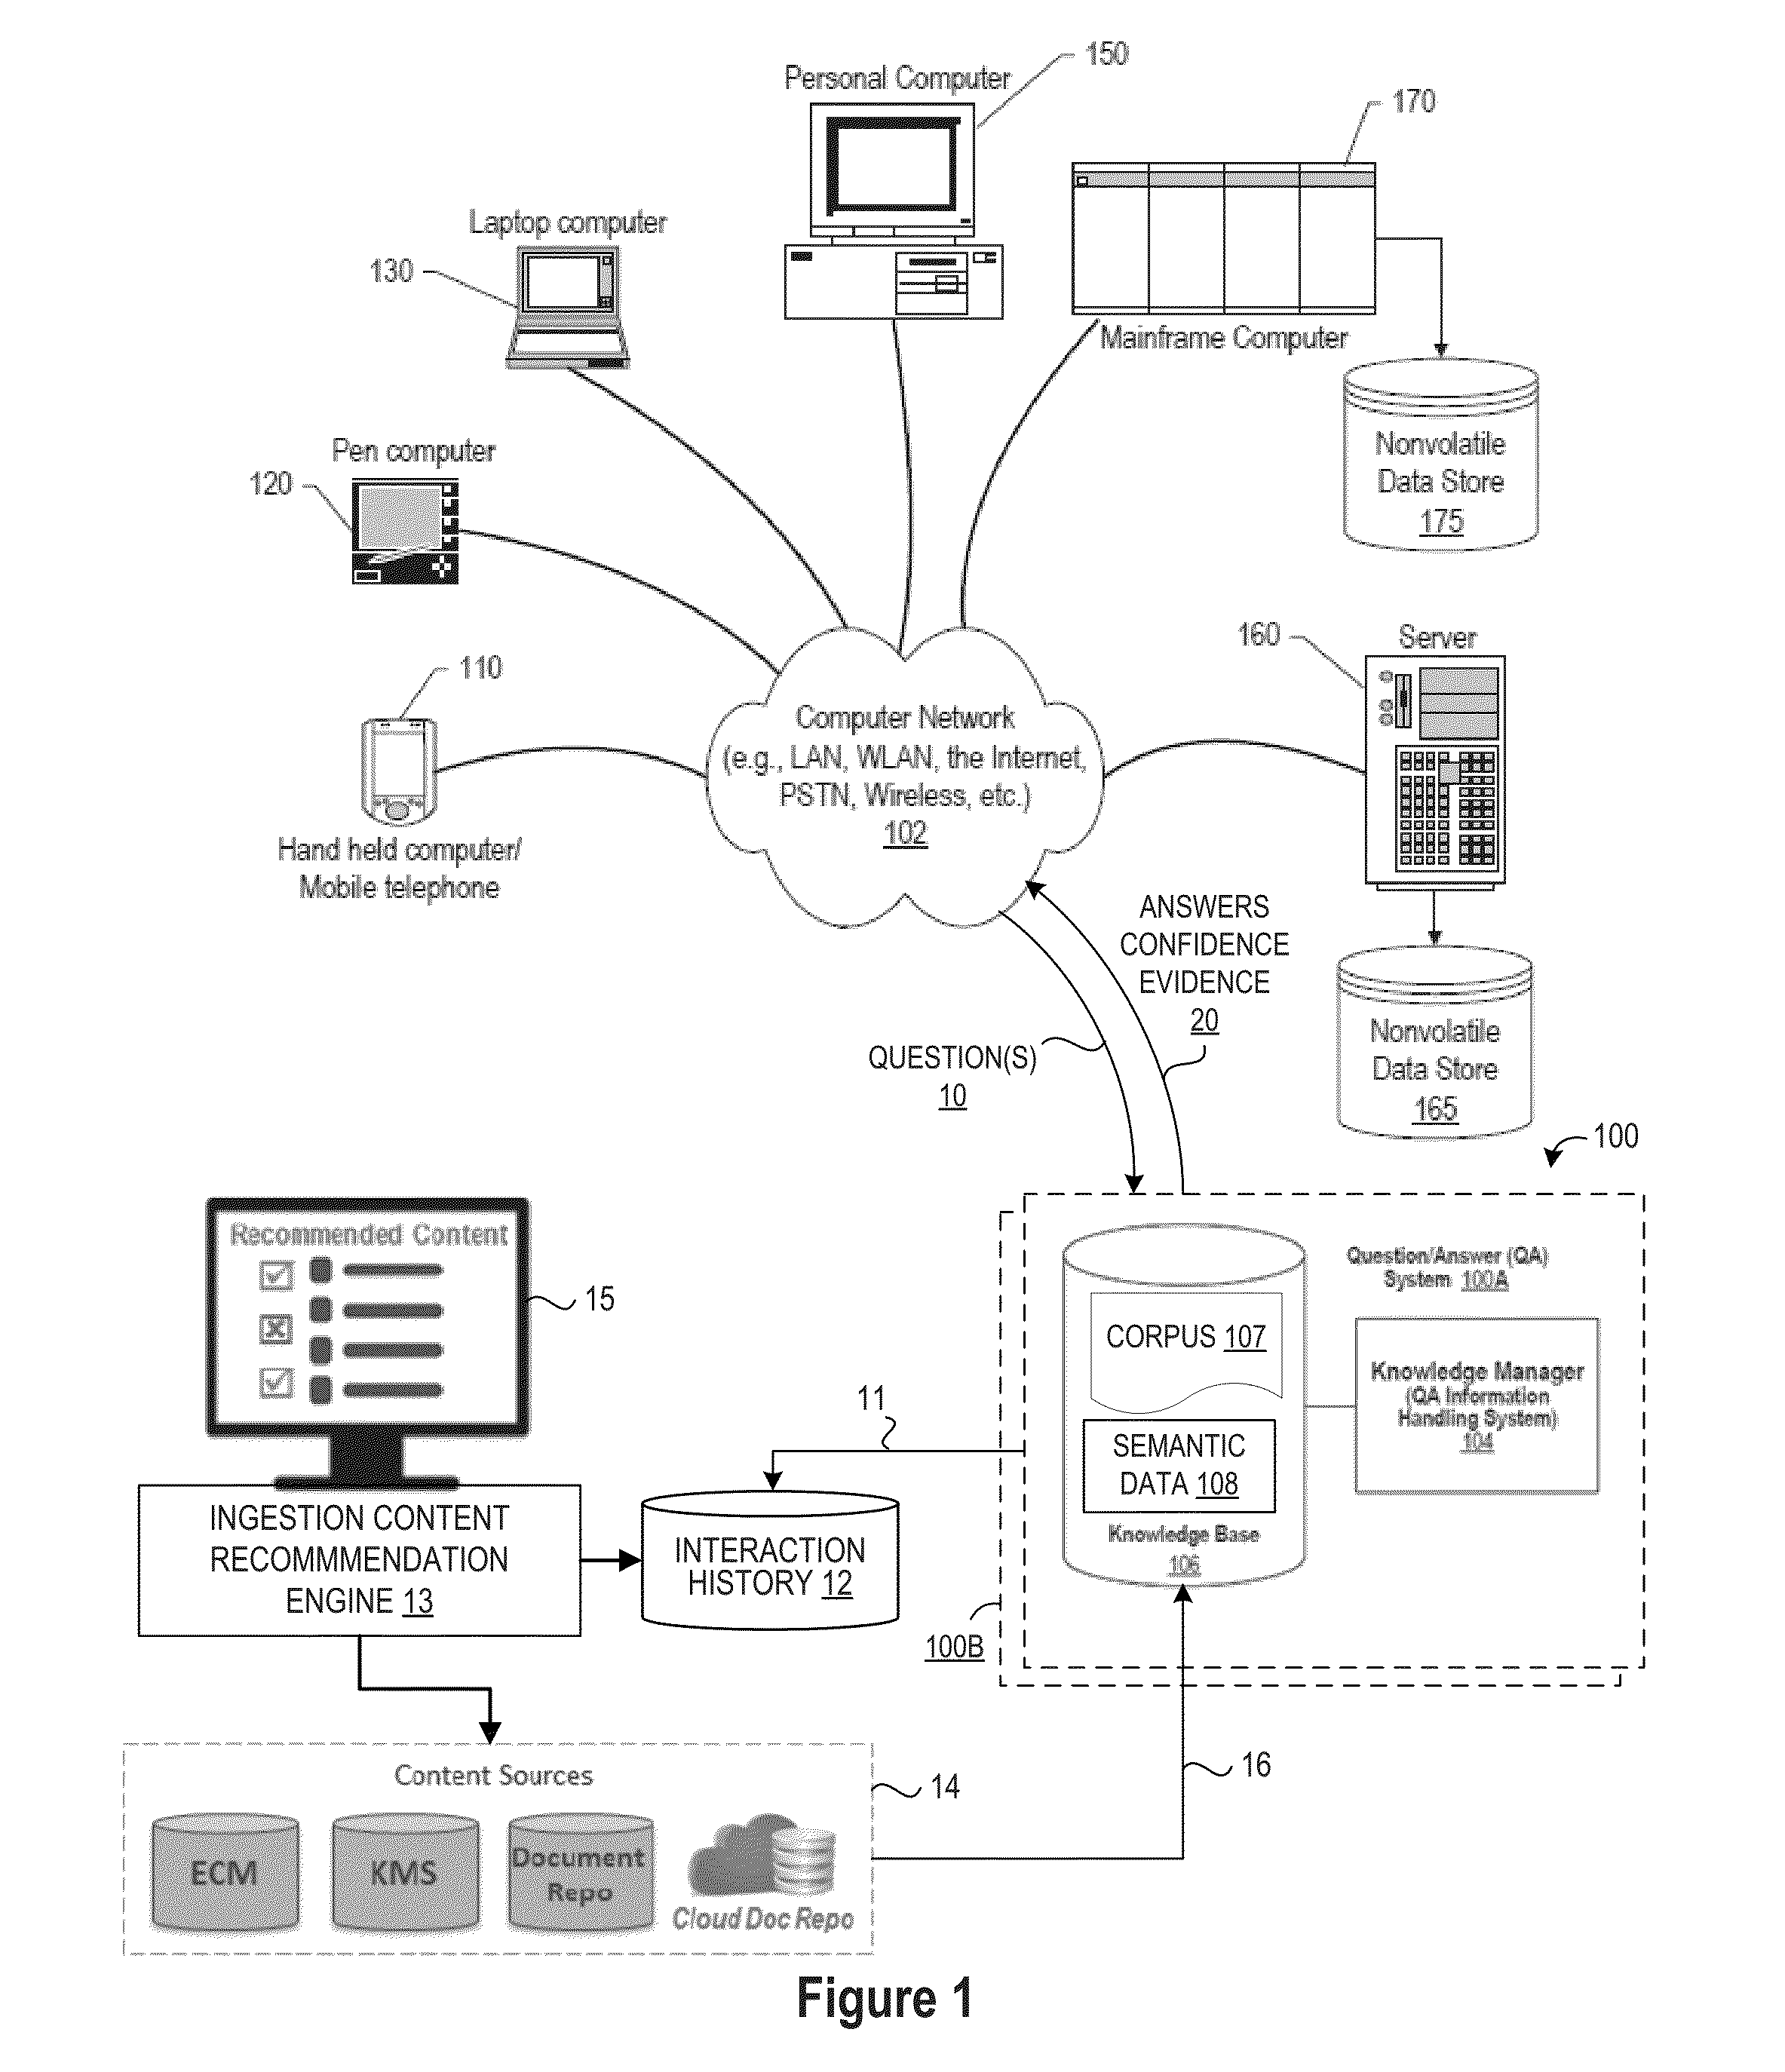 Method For Recommending Content To Ingest As Corpora Based On Interaction History In Natural Language Question And Answering Systems